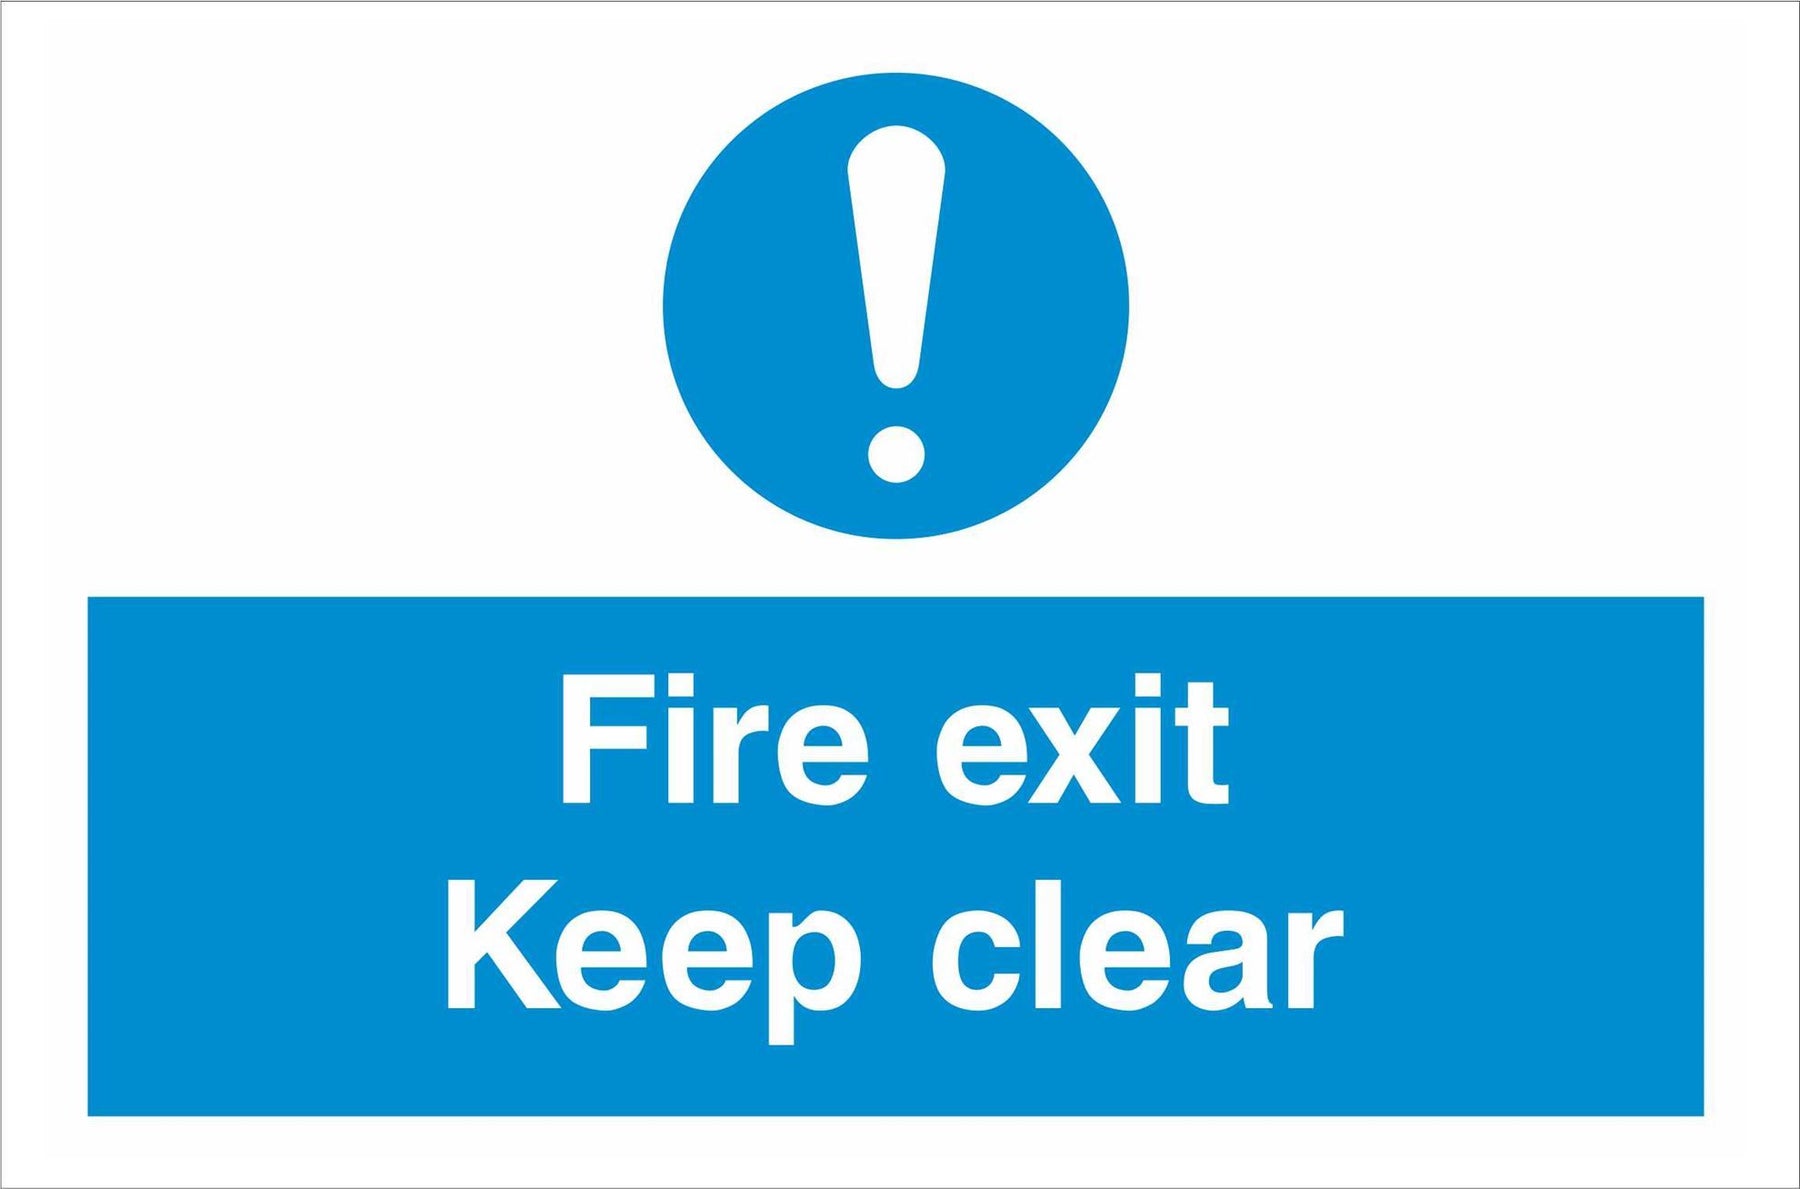 Fire exit Keep clear